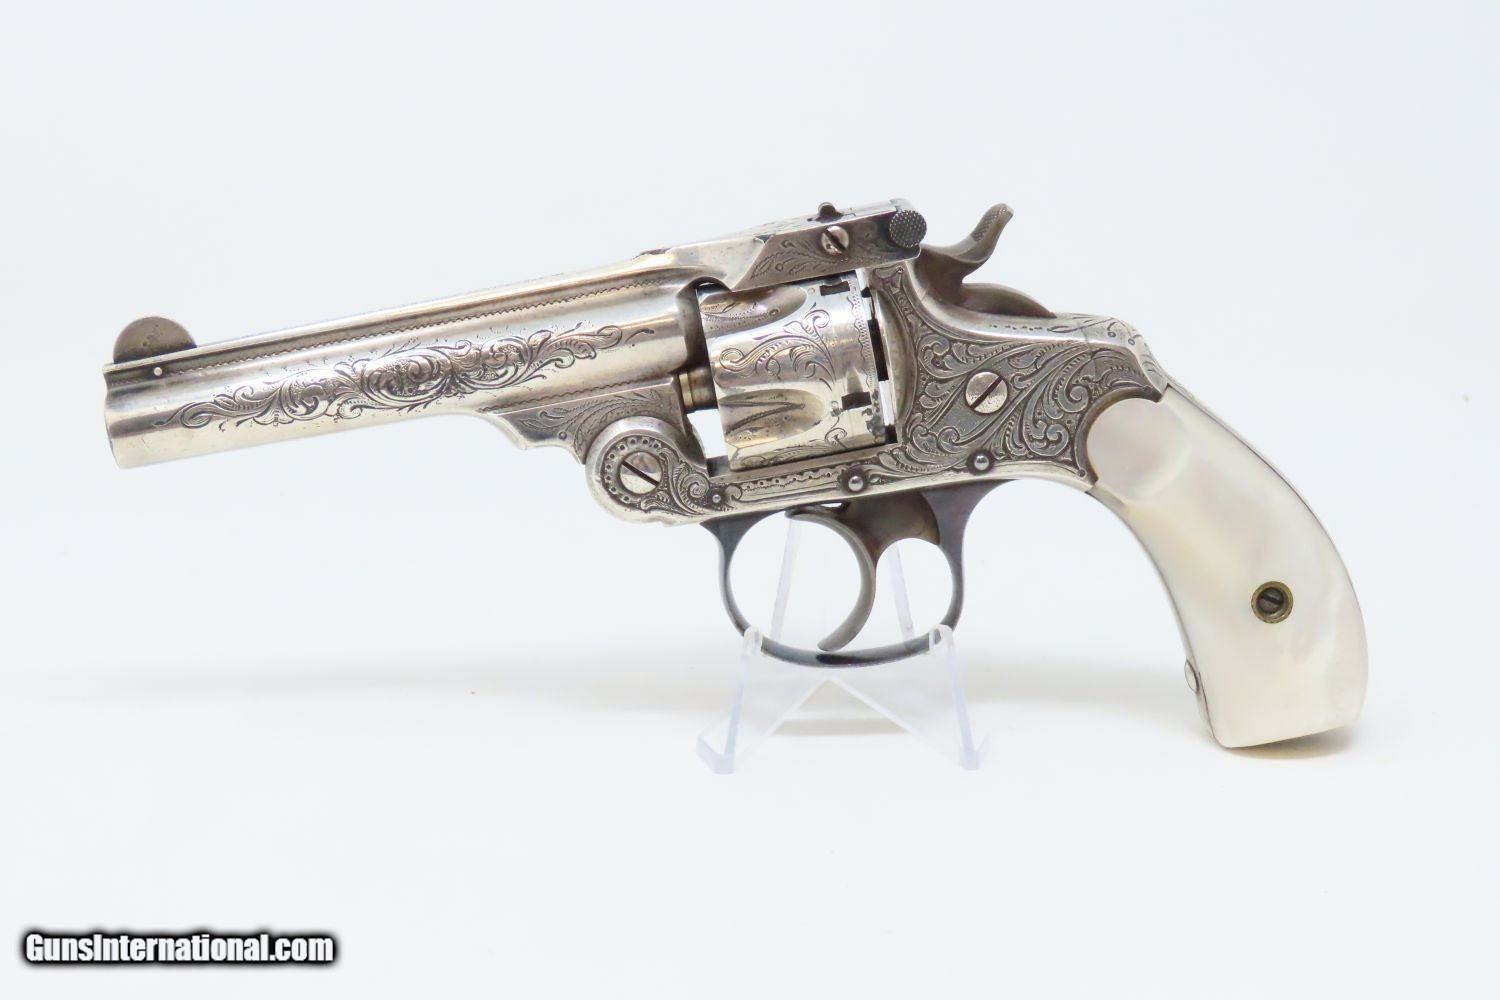 Pre-Owned - Smith & Wesson .32 S&W Break Action Revolver ☆ The